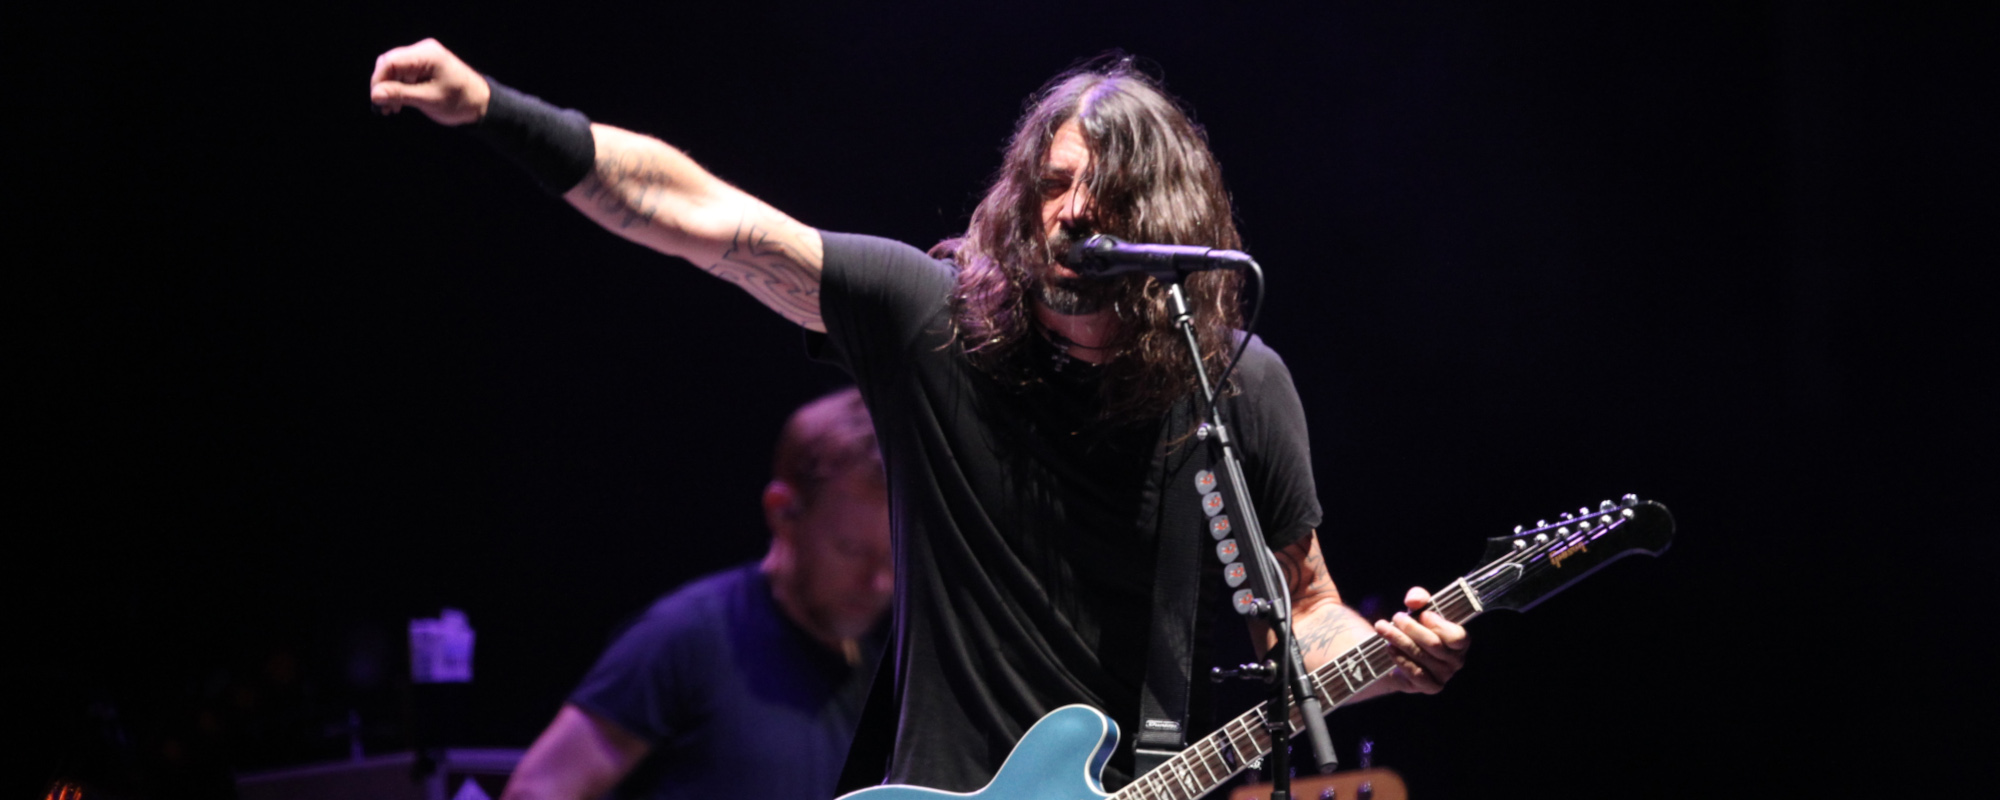 Foo Fighters Surprise Fans, Invite Gene Simmons on Stage at Las Vegas Show